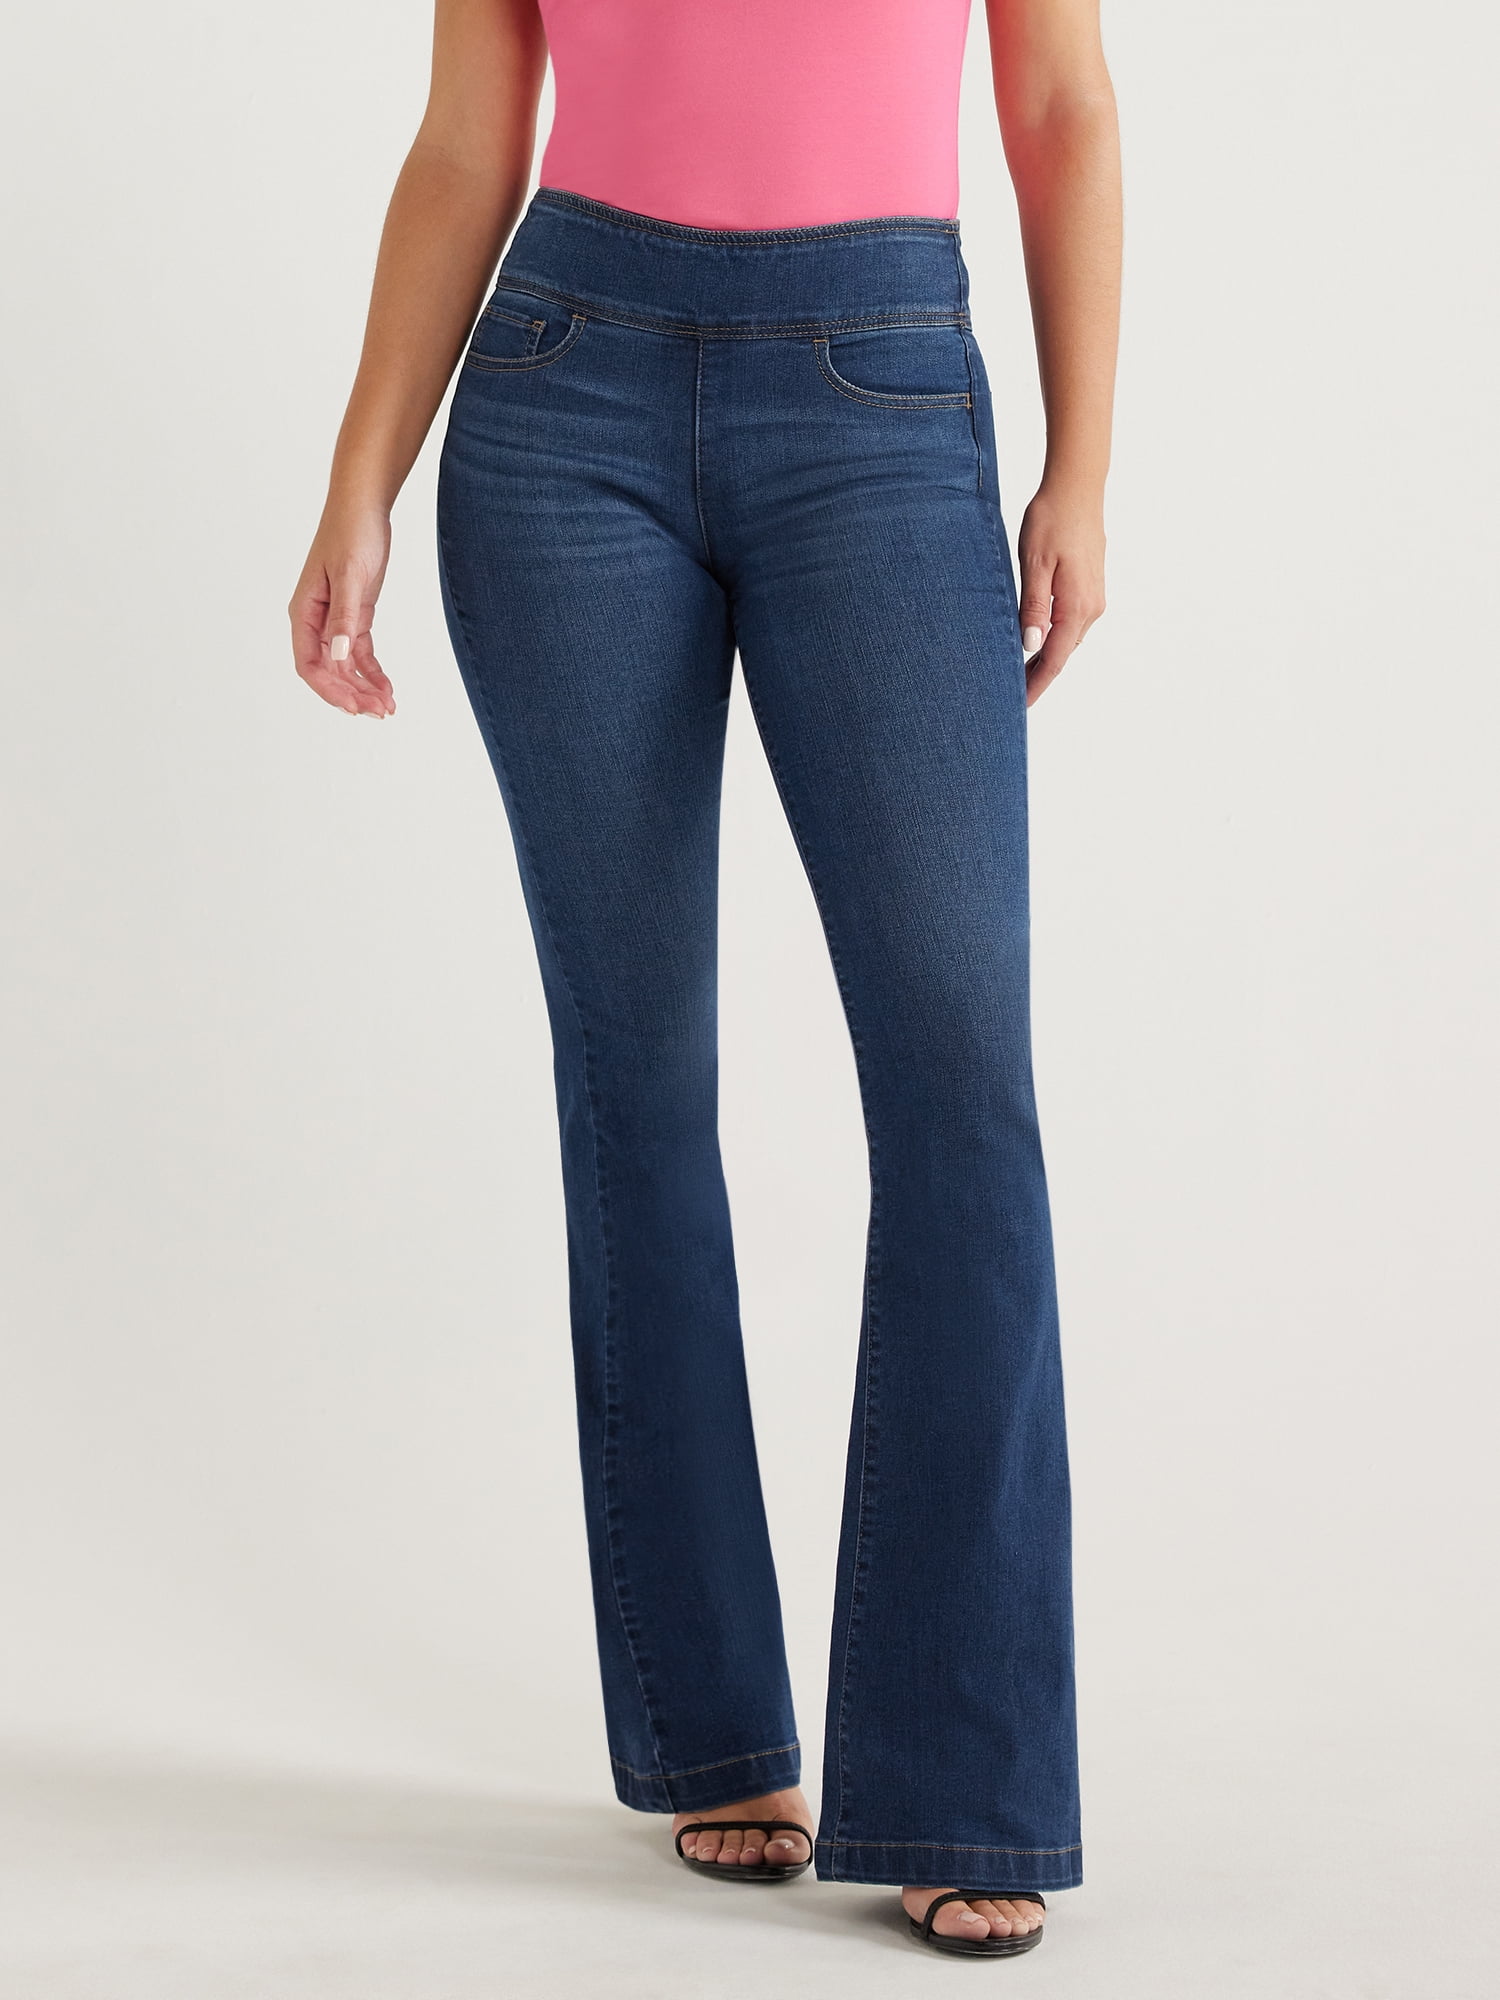 Sofia Jeans Women's Melissa Flare Pull On High Rise Jeans, 33.5 Inseam,  Sizes 2-20